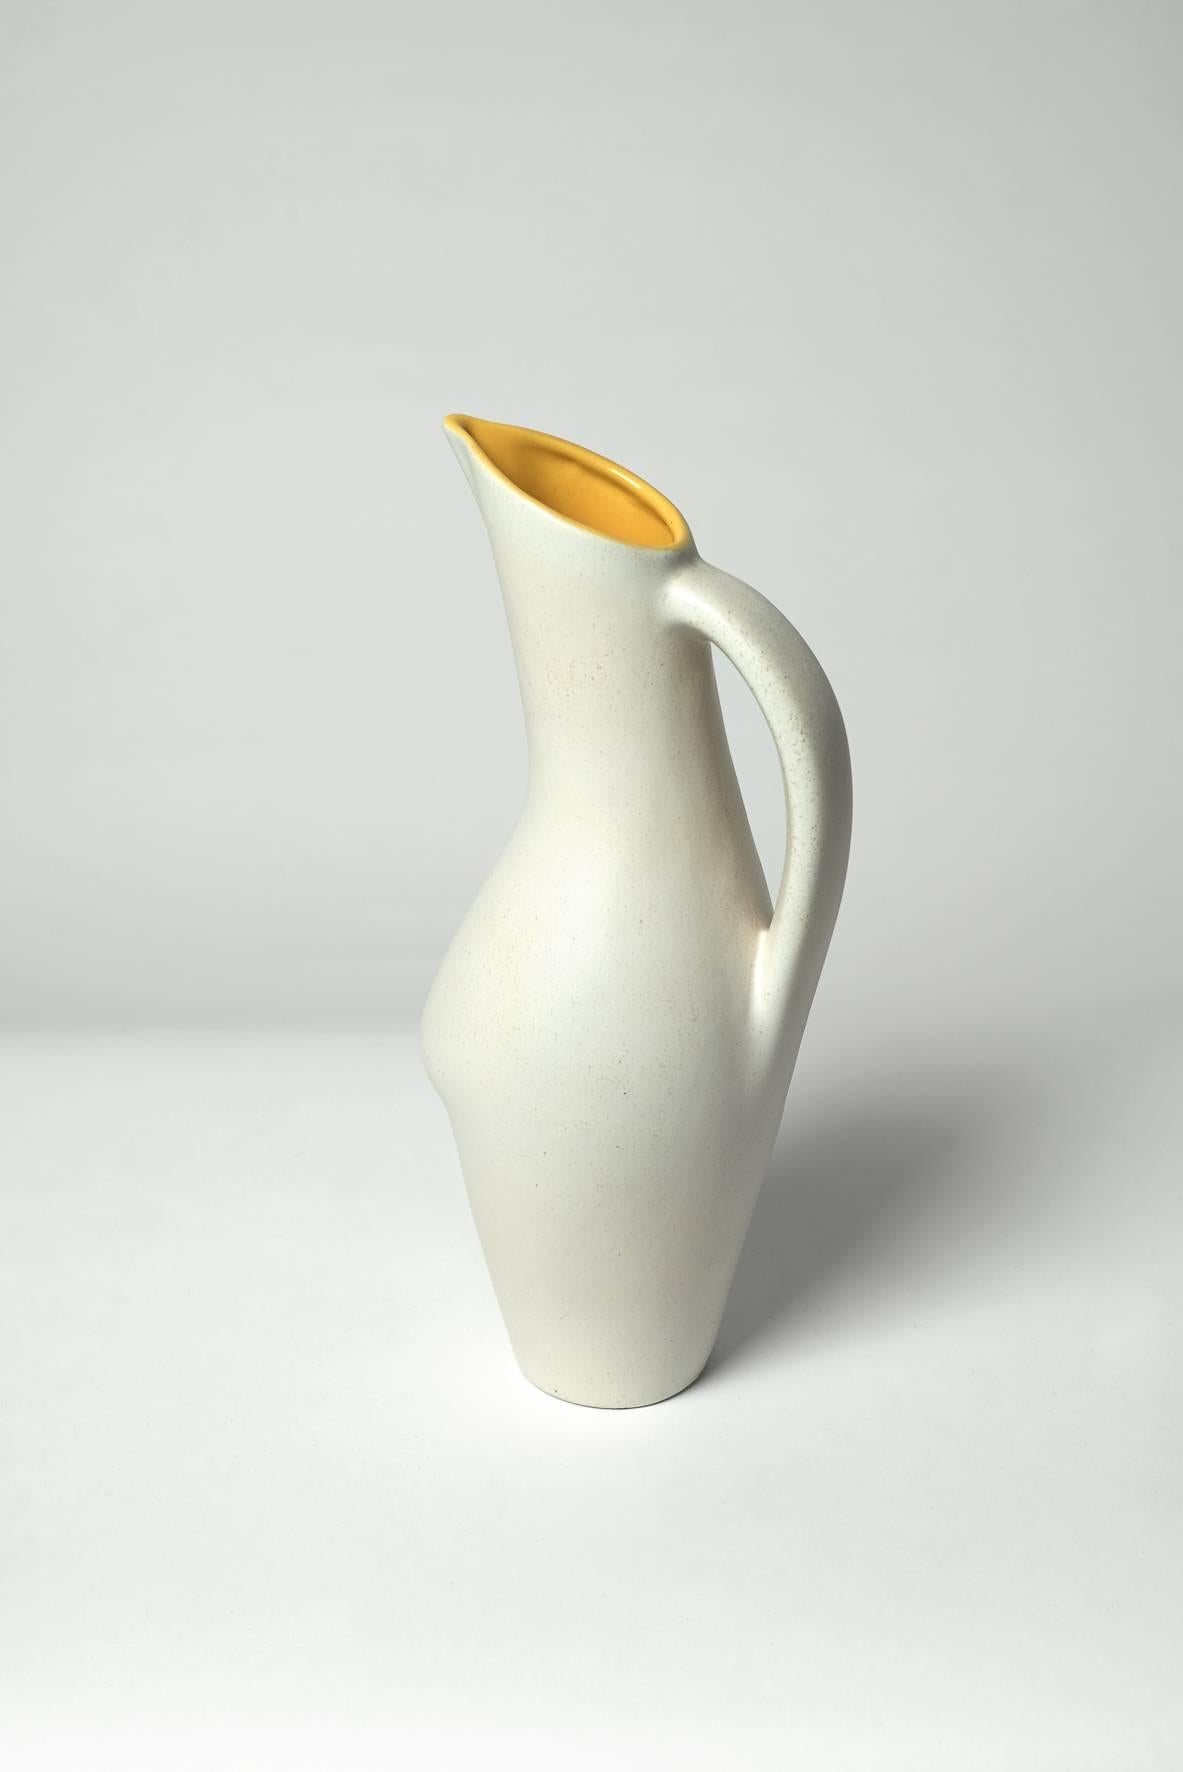 Pol Chambost (1906-1983)

Anthropomorphic form pitcher white and yellow inside, signed Pol Chambost Made in France

Measures: H 33 cm.

 